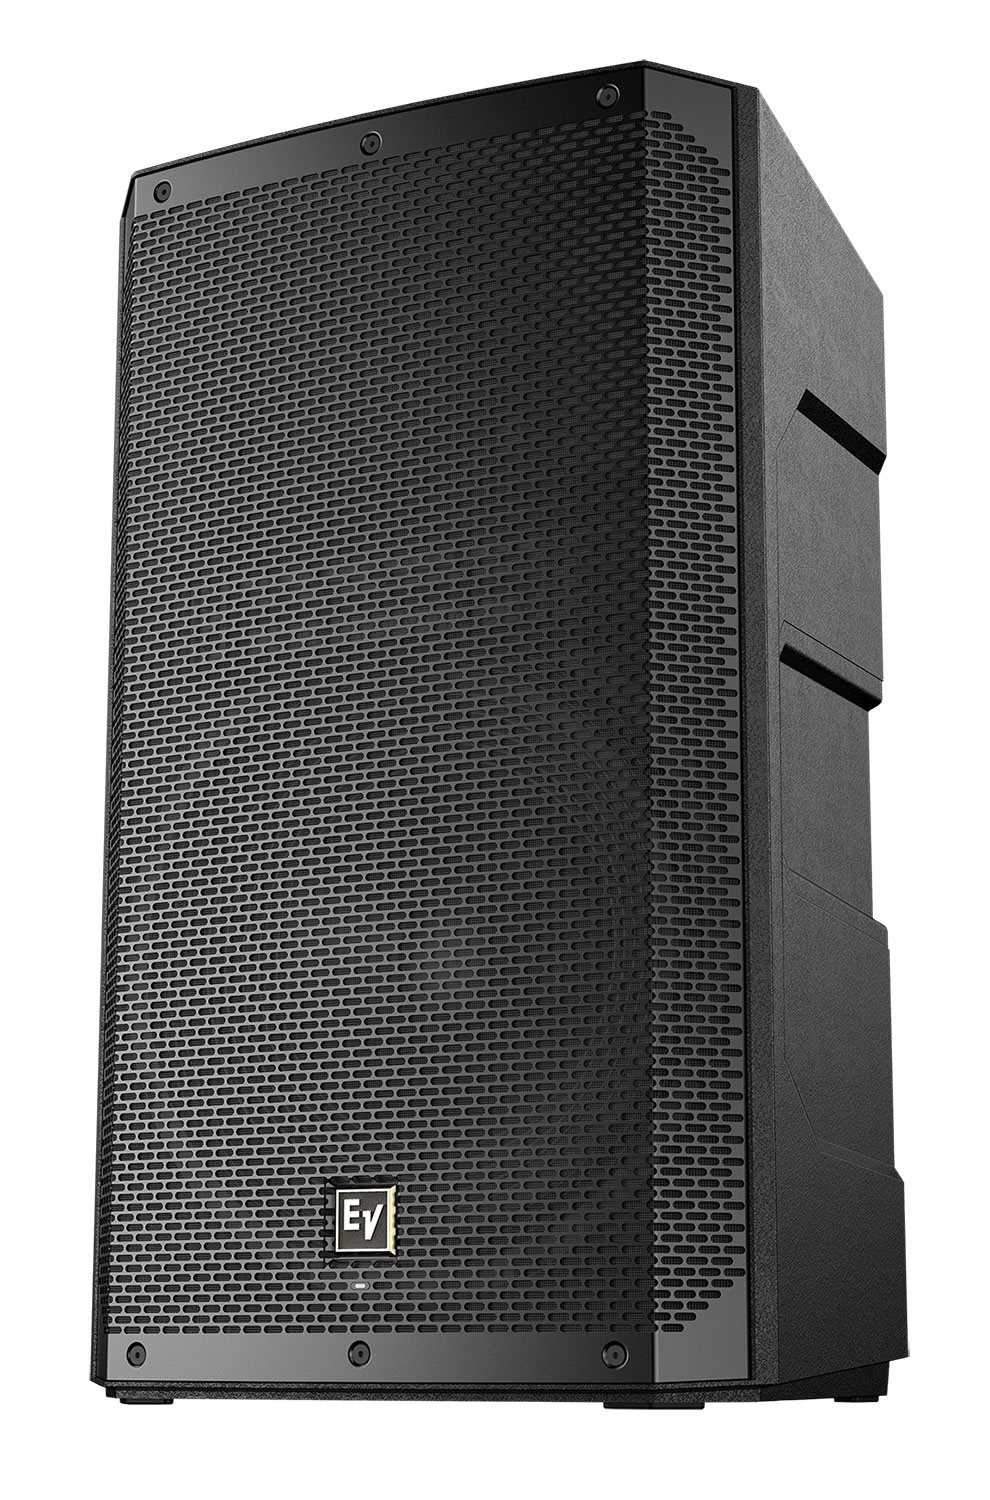 Electro Voice ELX200-15P 15-in Powered Speakers with Gator Totes & Ultimate Stands - PSSL ProSound and Stage Lighting